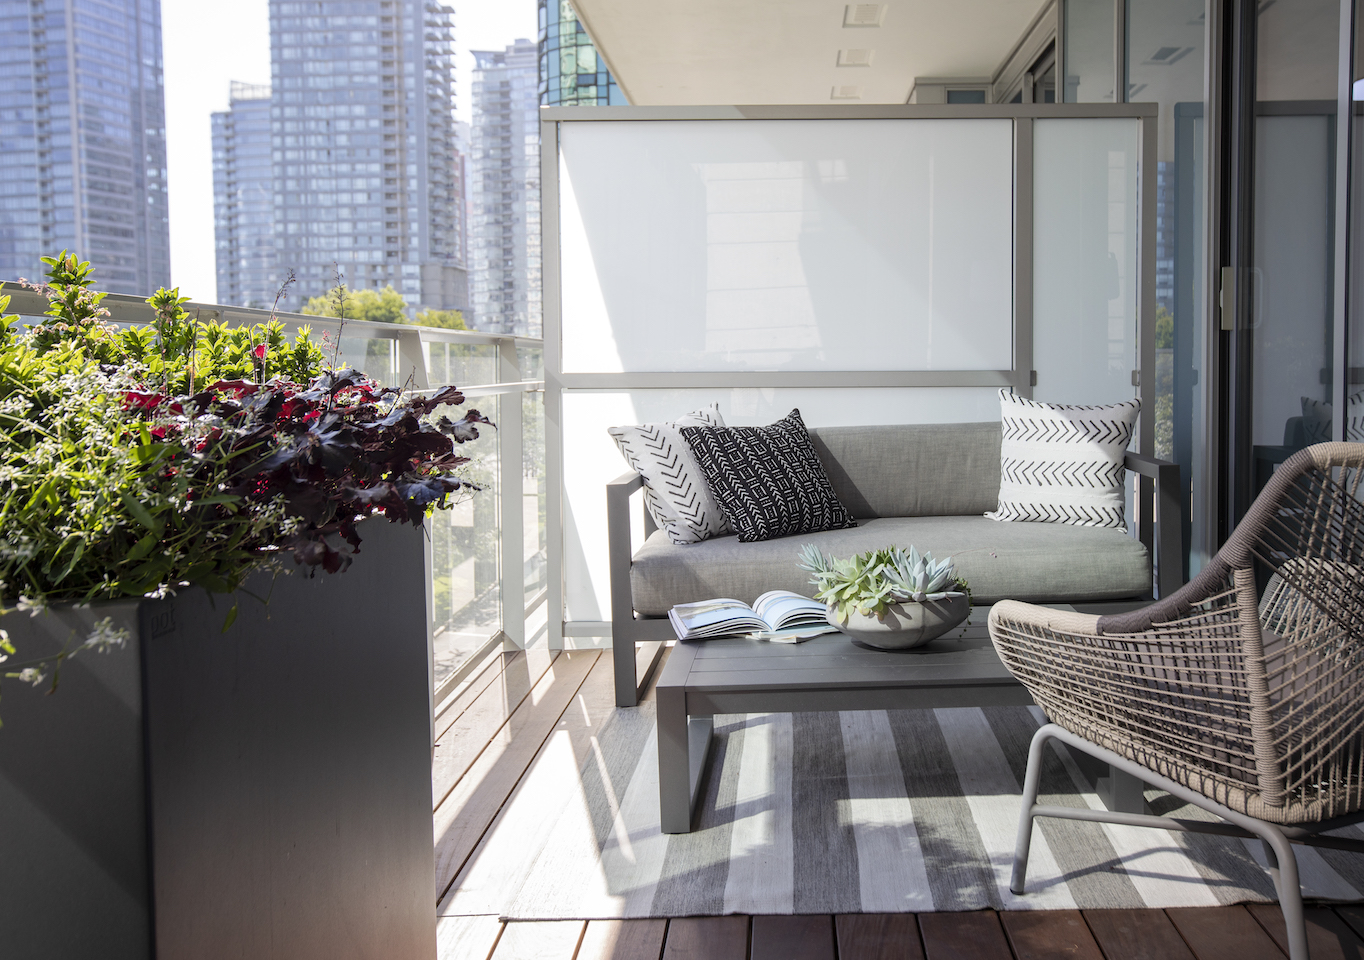 How To Create A Sense Of Privacy In Your Backyard Or On Your Balcony -  Chatelaine